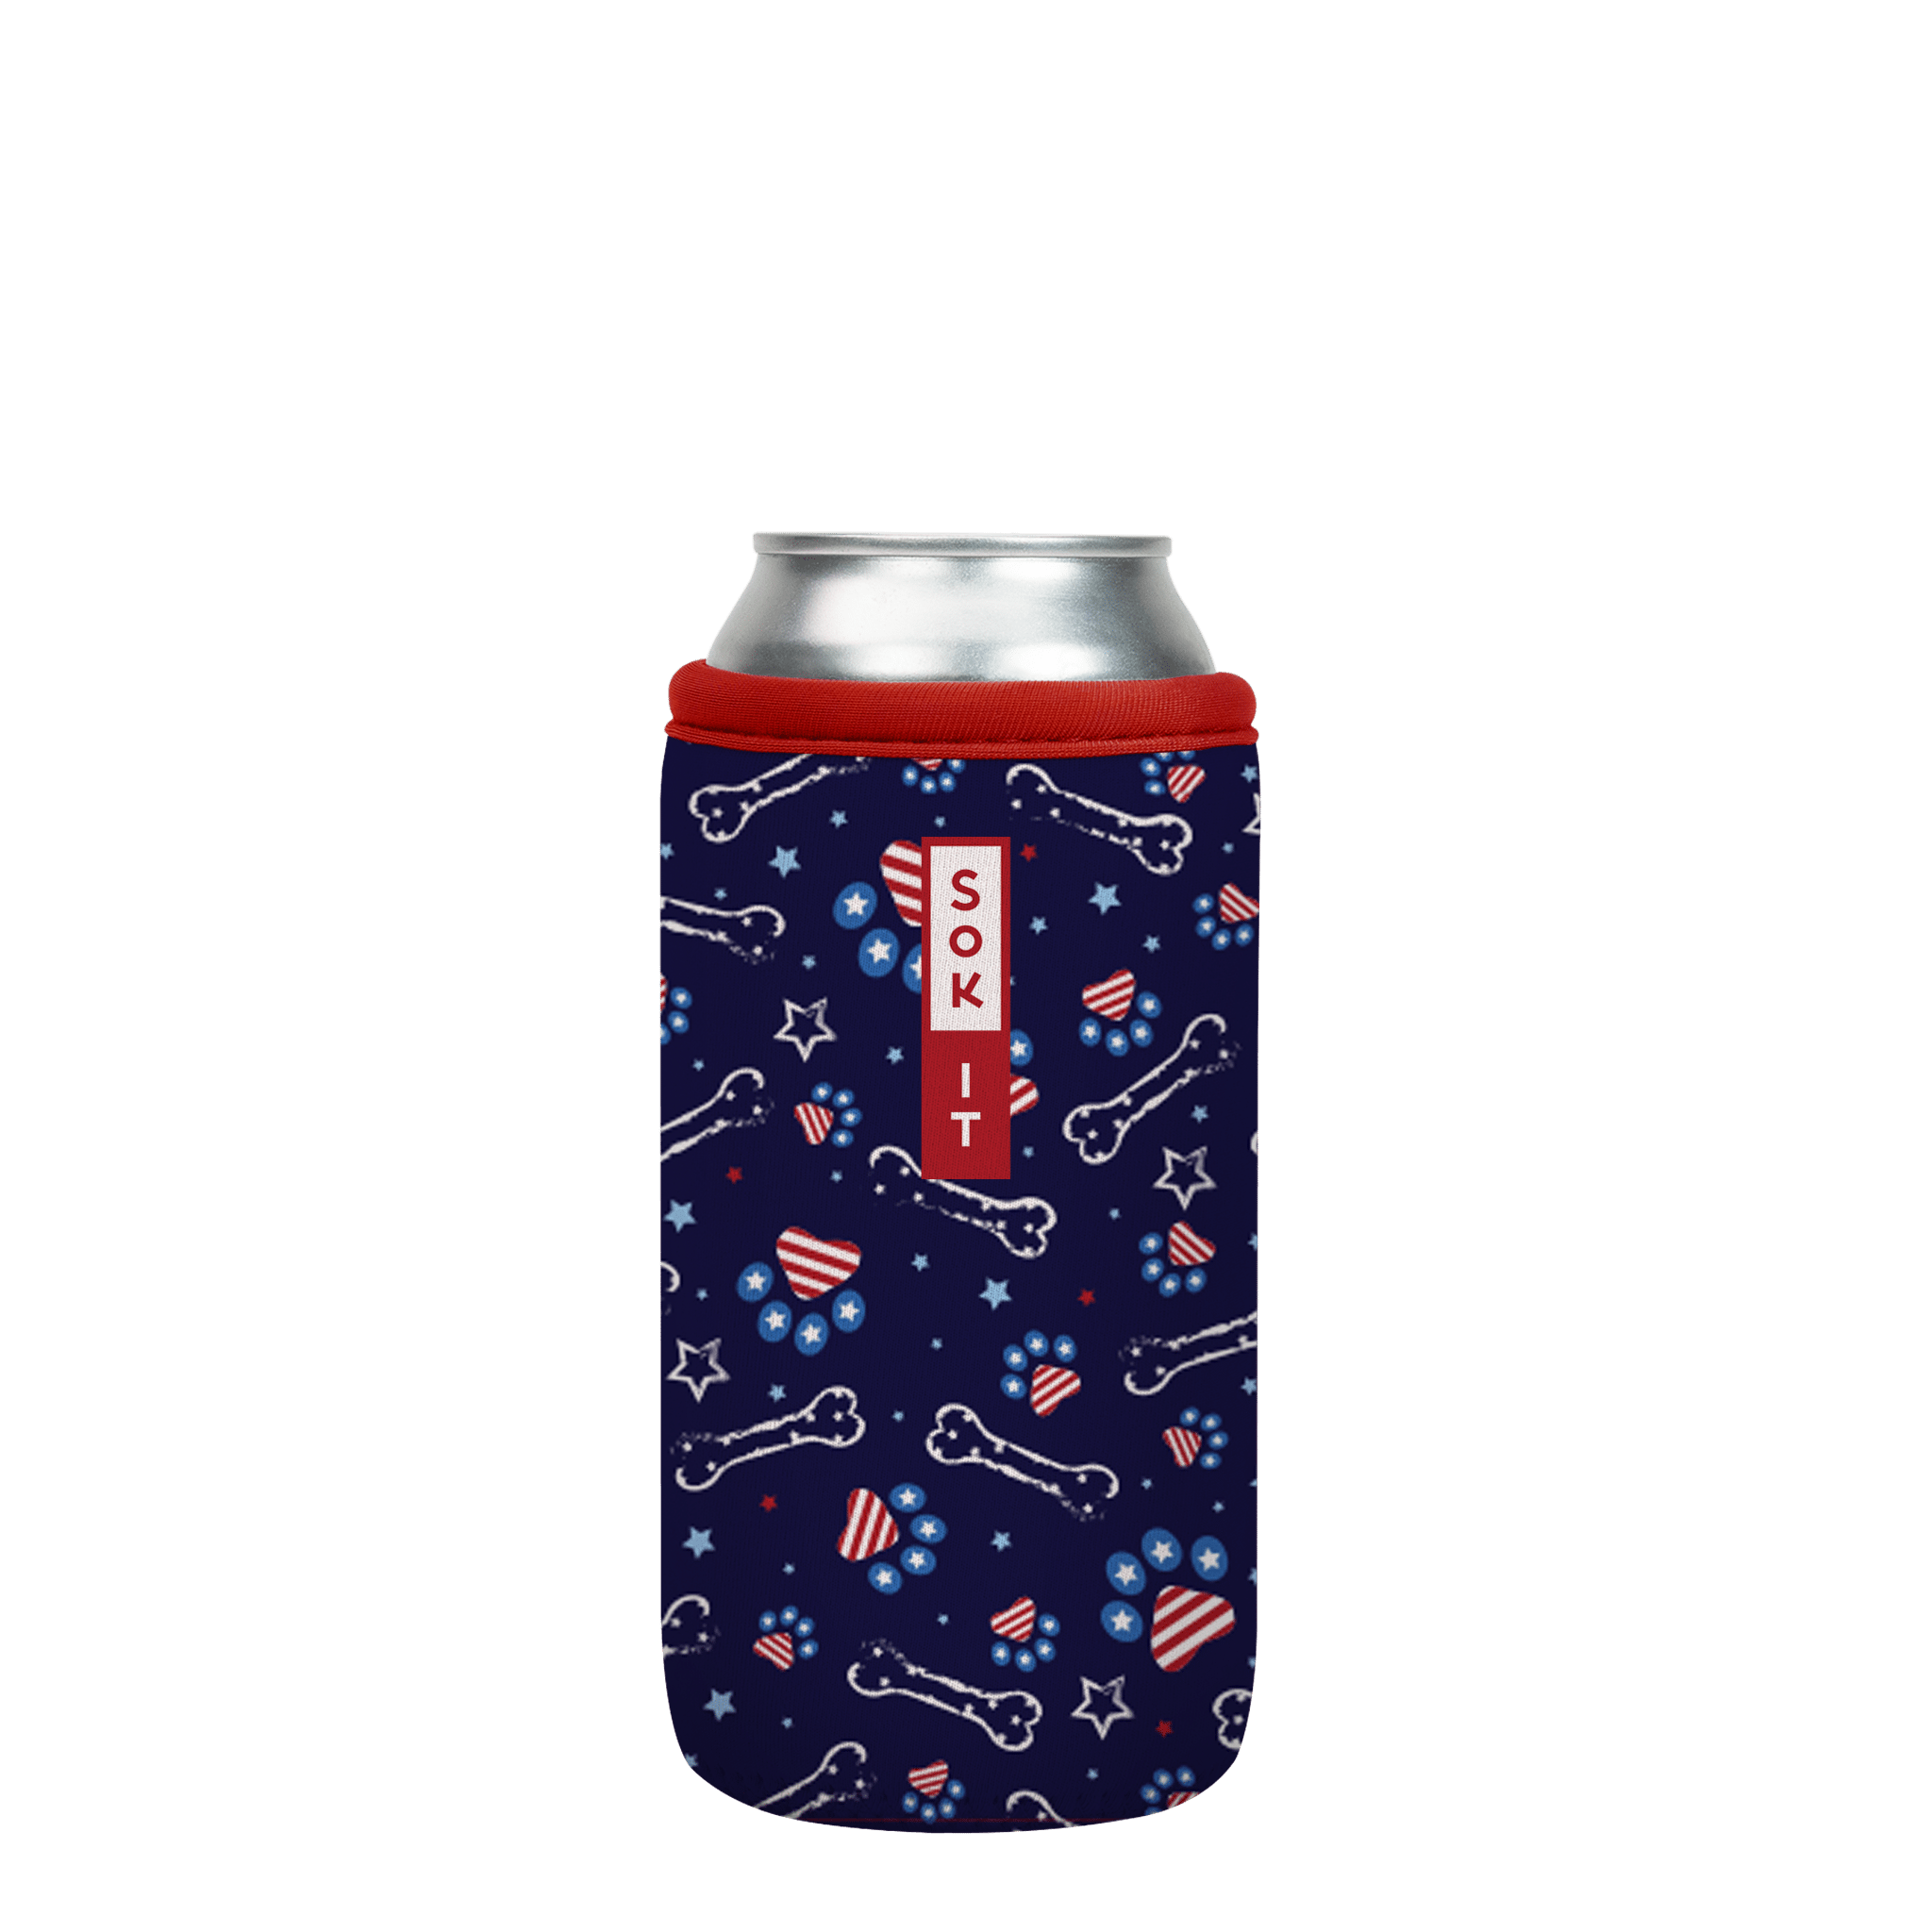 CanSok-July 4th 16oz Can 